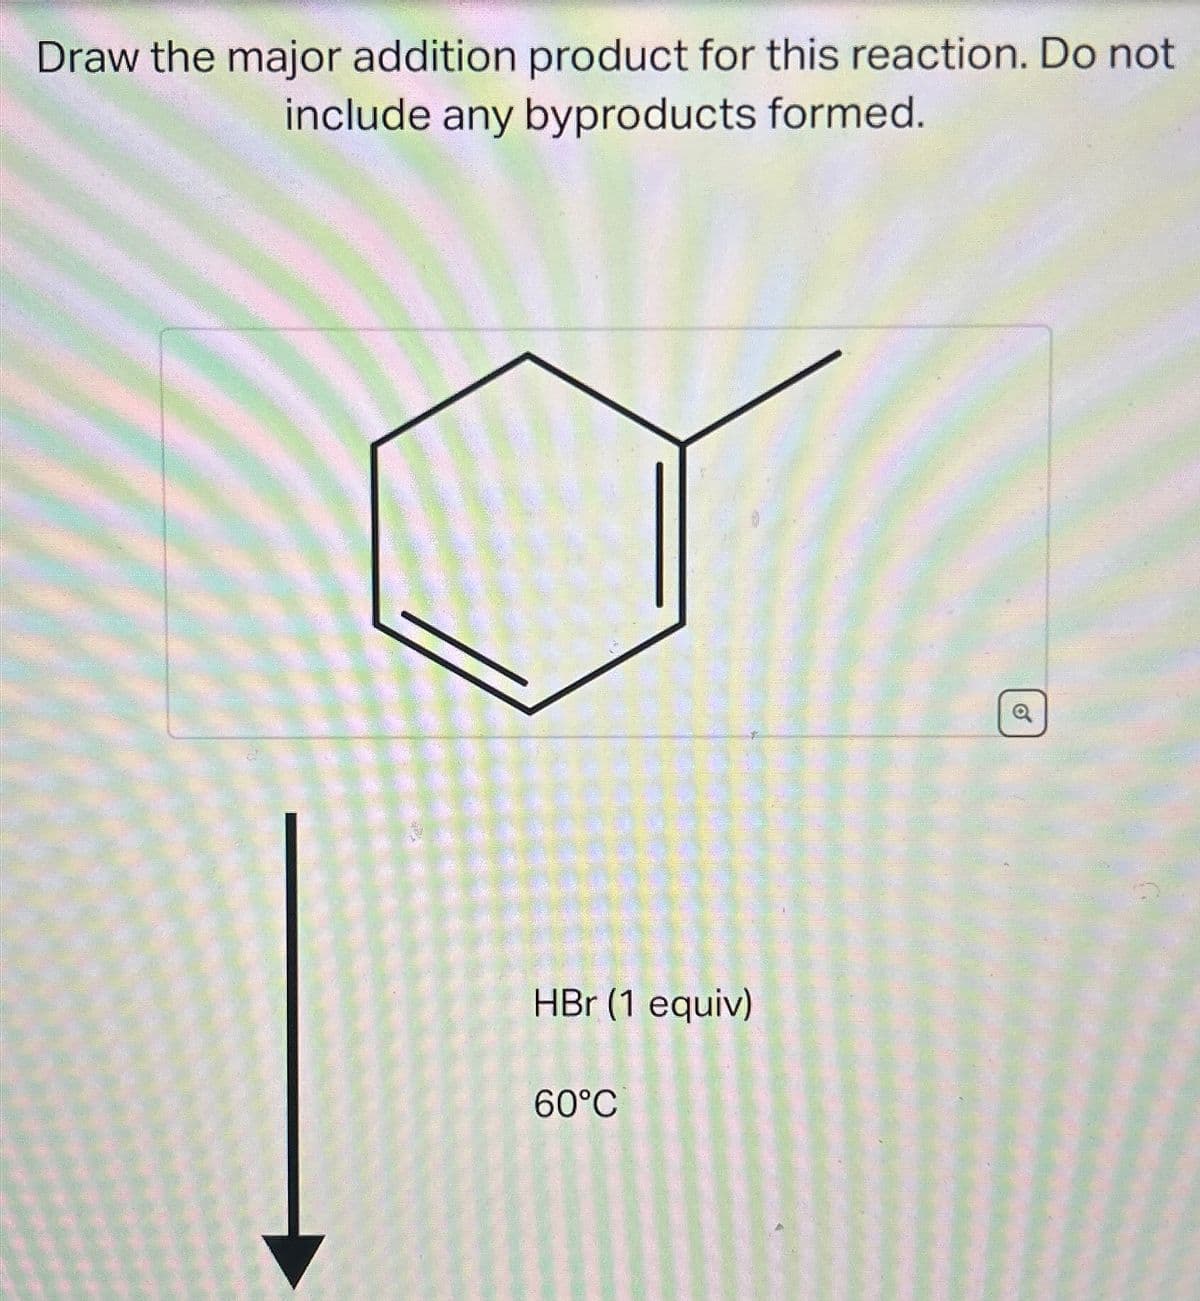 Draw the major addition product for this reaction. Do not
include any byproducts formed.
HBr (1 equiv)
60°C
Q